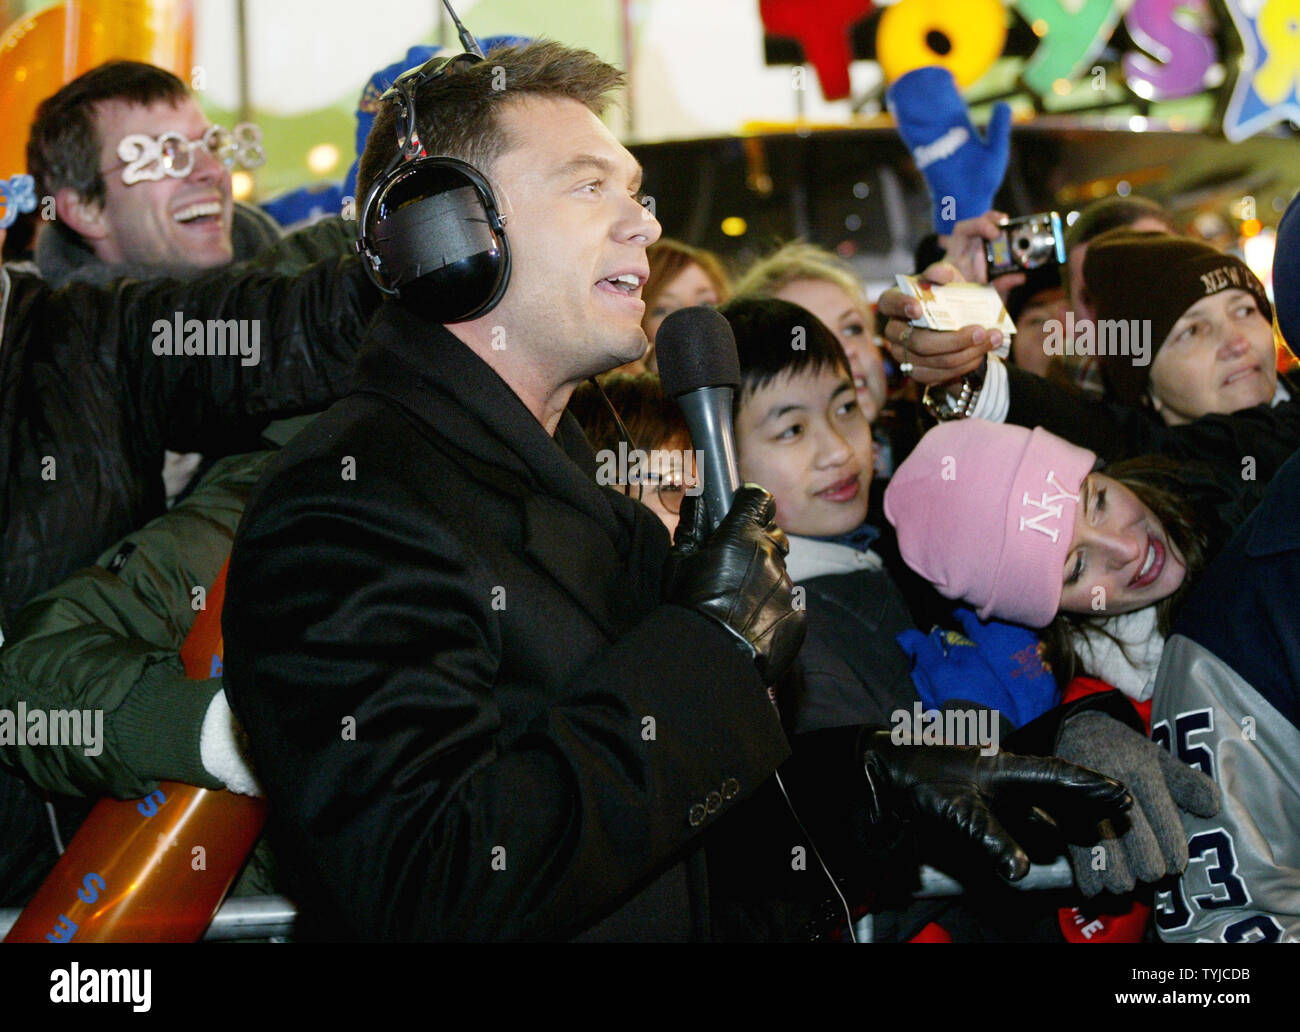 American Idol host Ryan Seacrest does a live broadcast spot before people gathered in Times Square to celebrate New Year's Eve on January 1, 2008 in New York. (UPI Photo/Monika Graff). Stock Photo